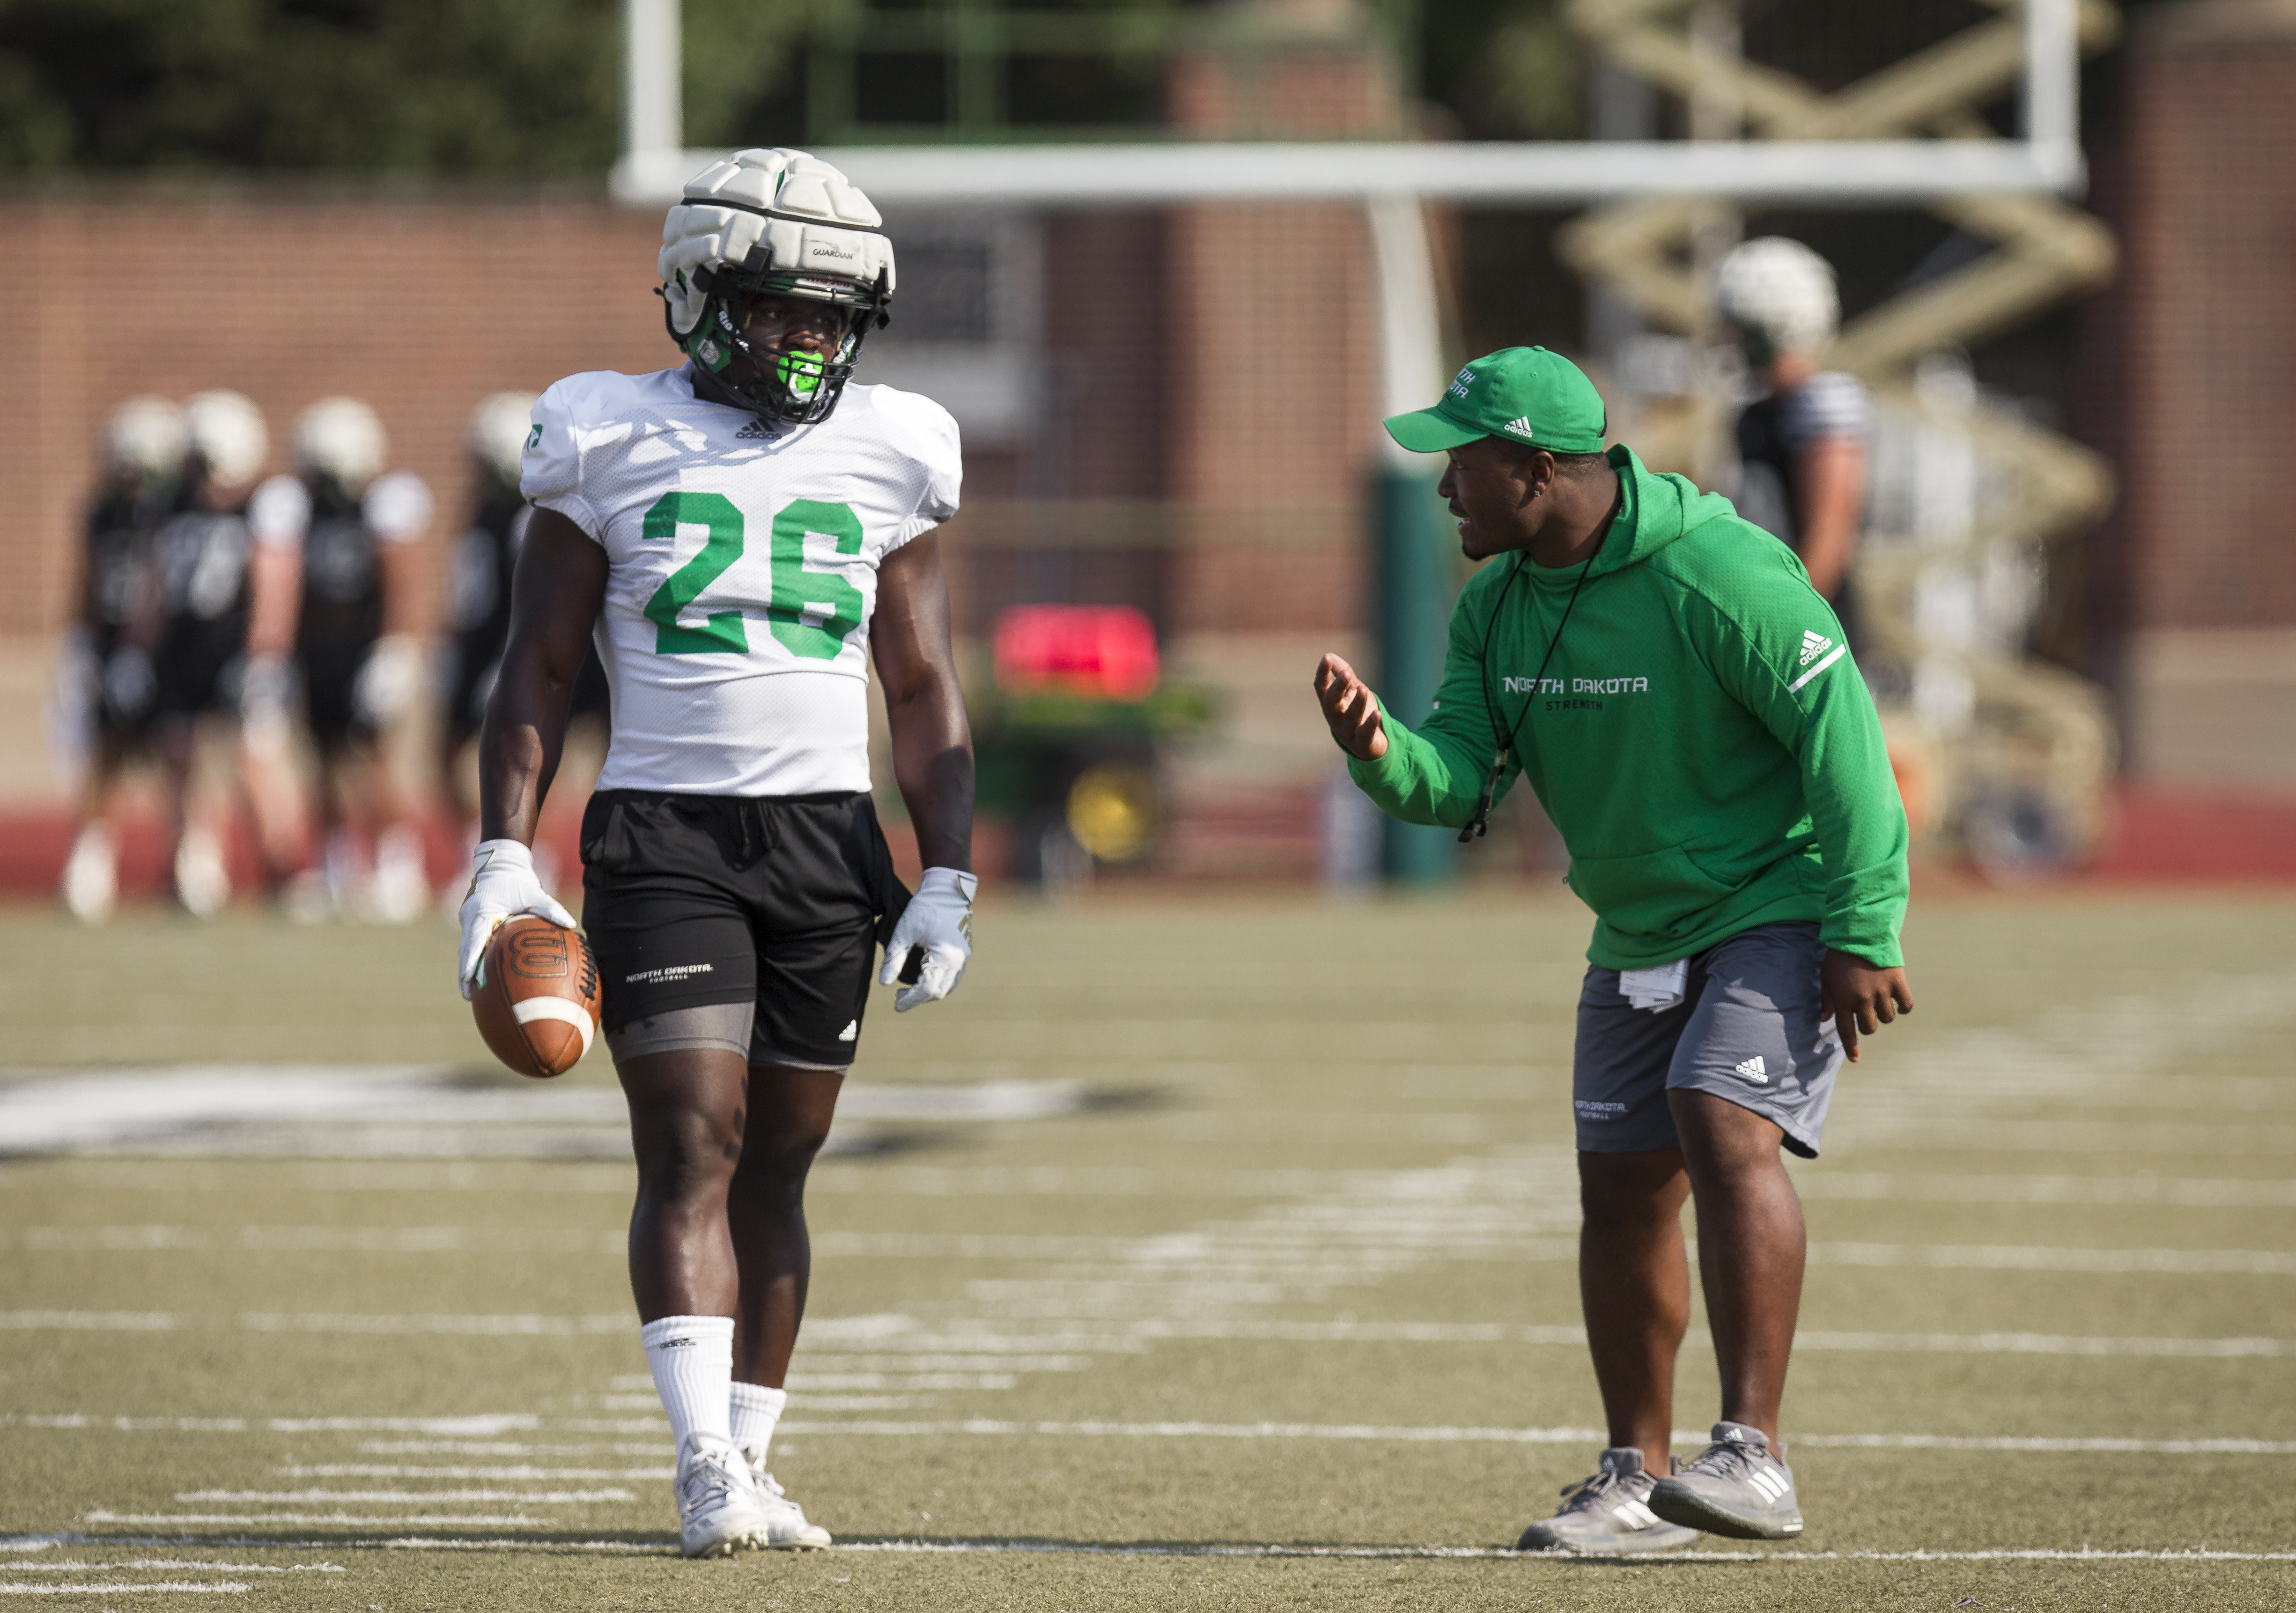 UND posts job for new running backs coach - Grand Forks Herald